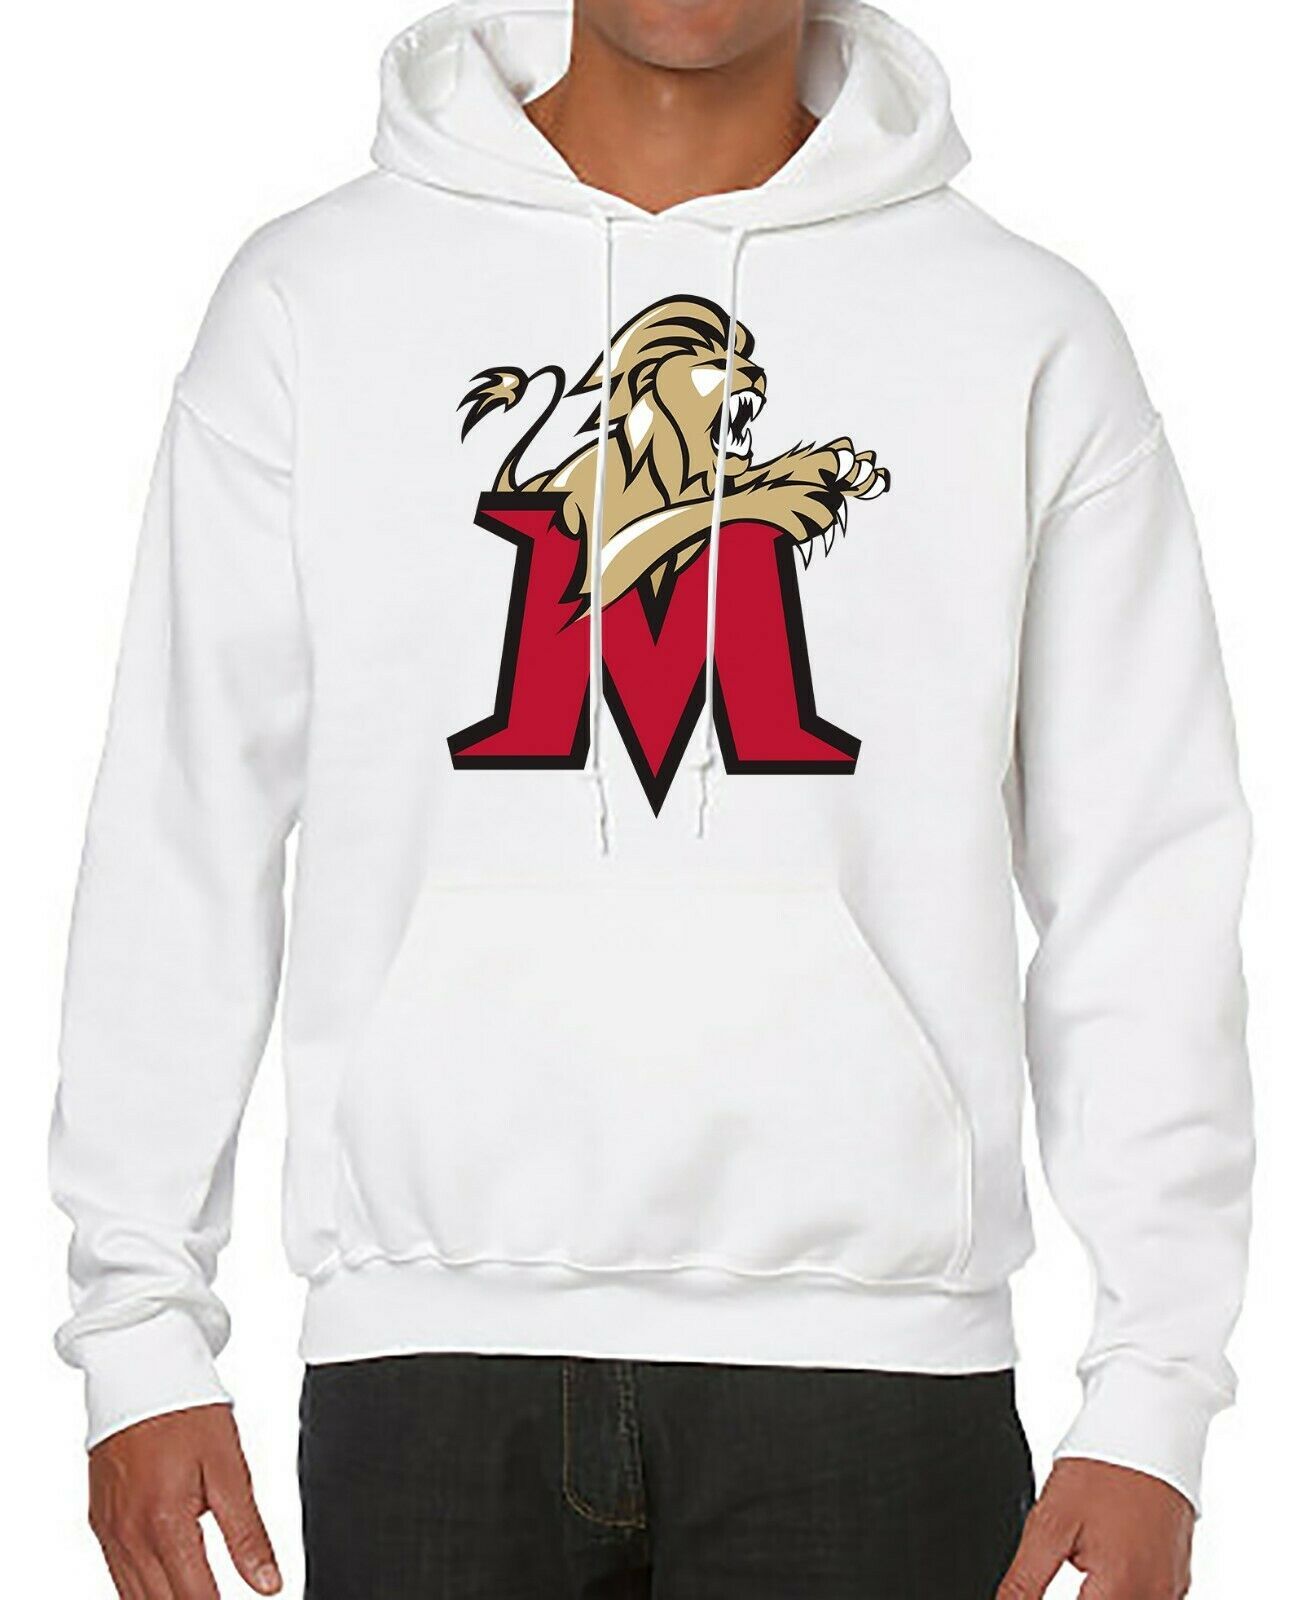 NCAA Basketball team hoodie - sweater with Molloy College logo ...